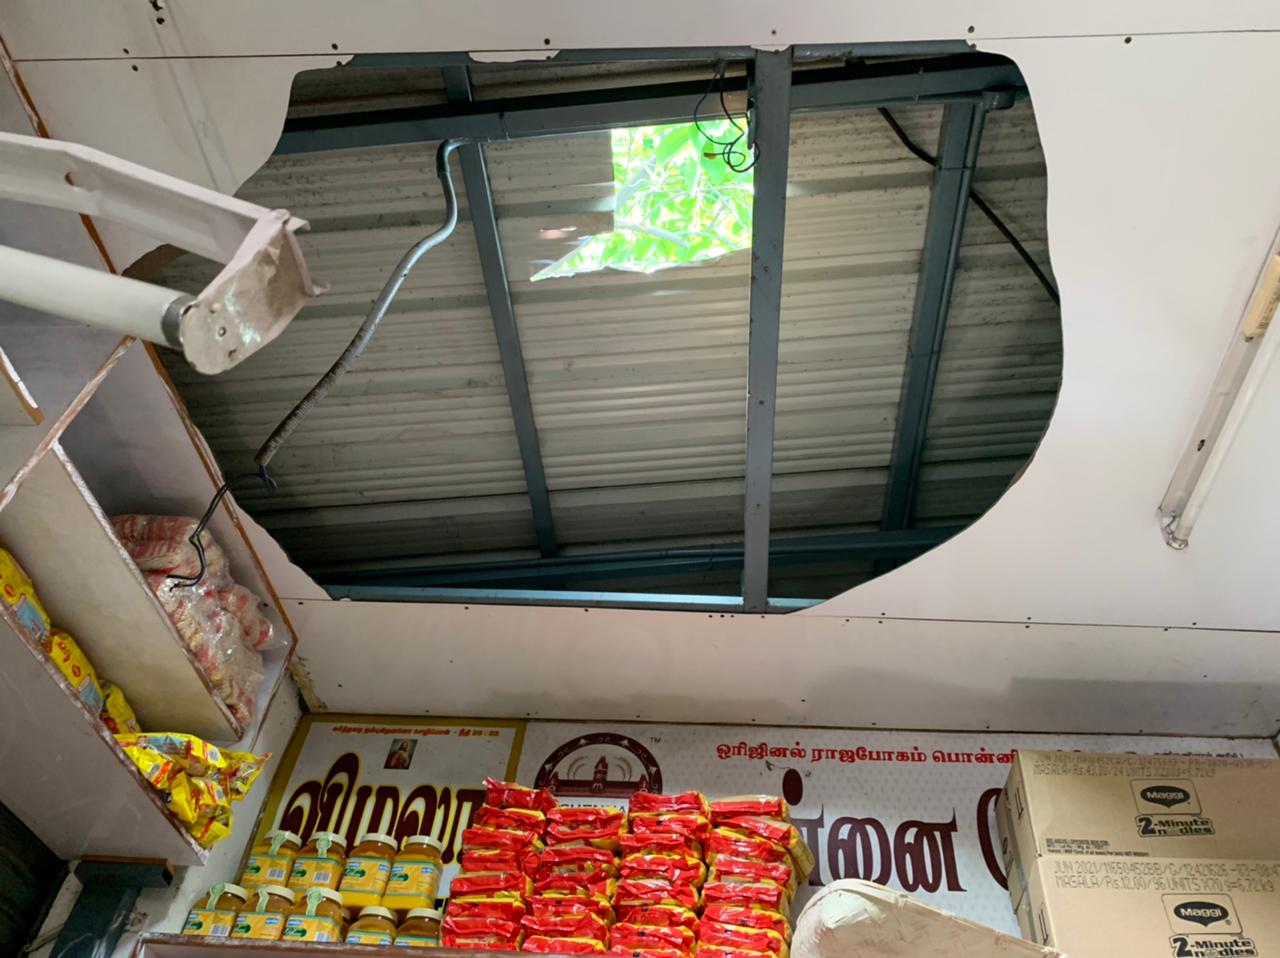 Burglars in Chennai make a hole in the roof, 2 lakhs cash stolen